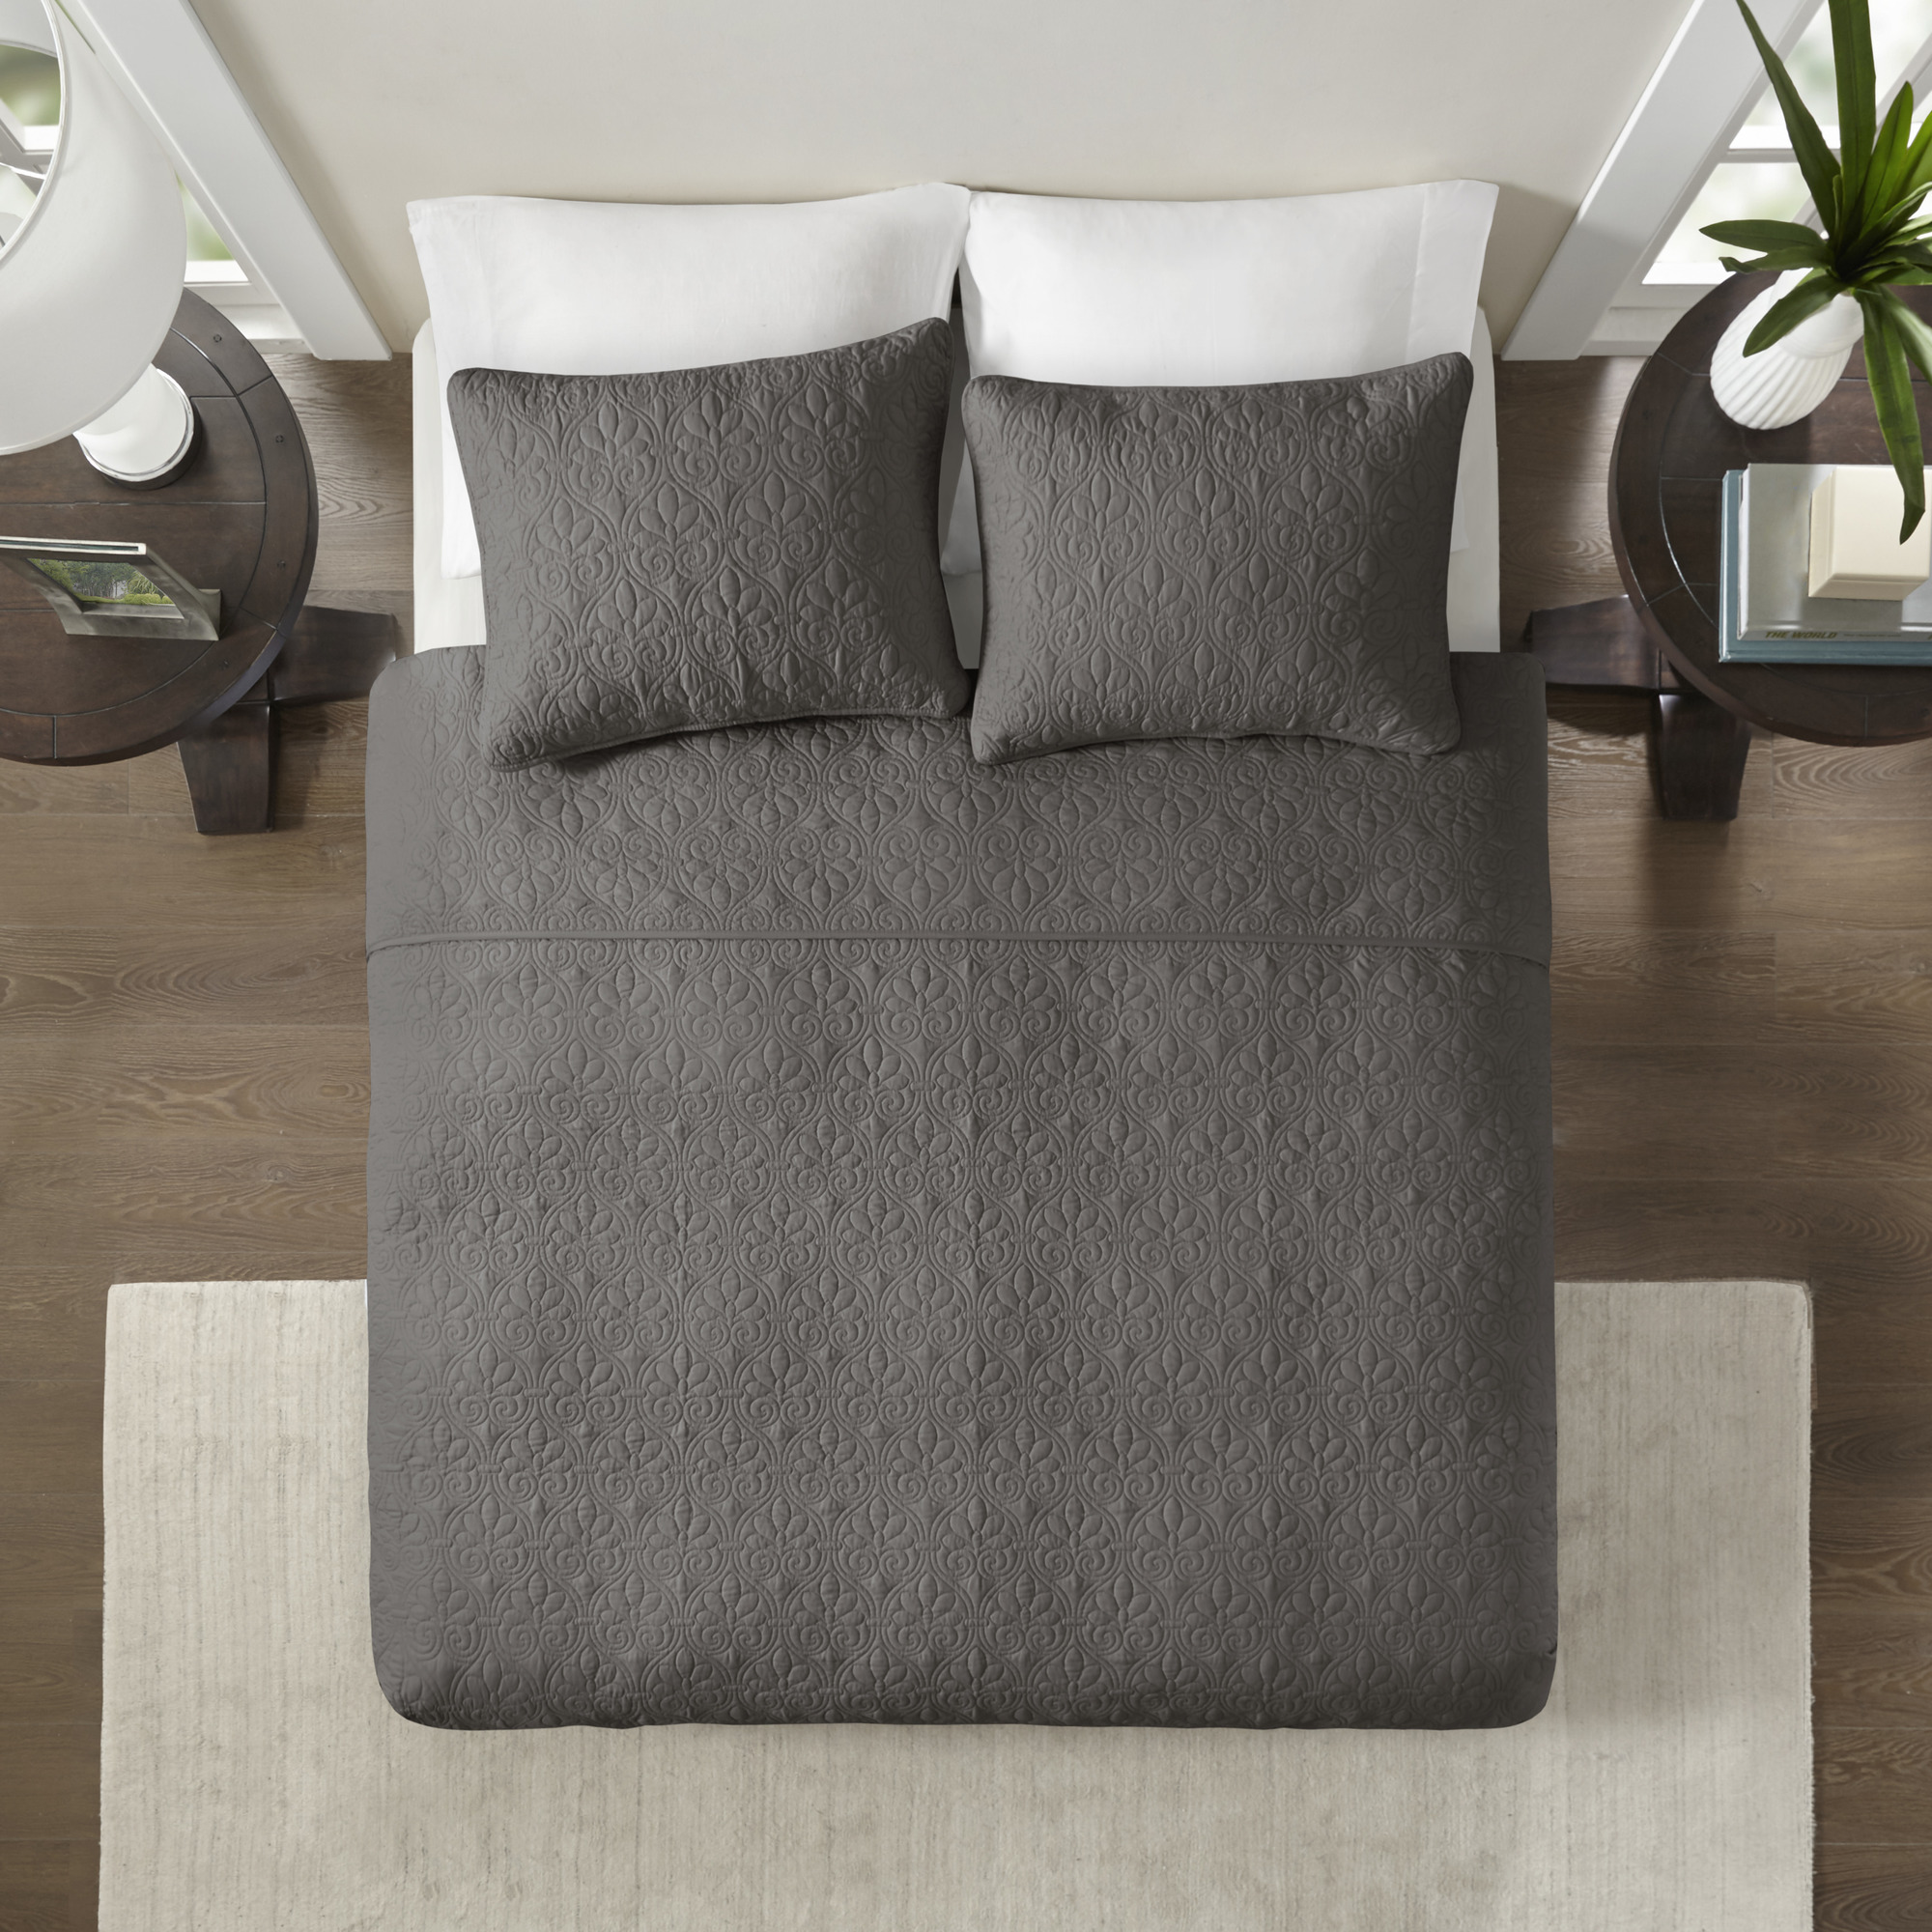 Home Essence Vancouver Super Soft Reversible Coverlet Set, Full/Queen, Dark Grey - image 5 of 13